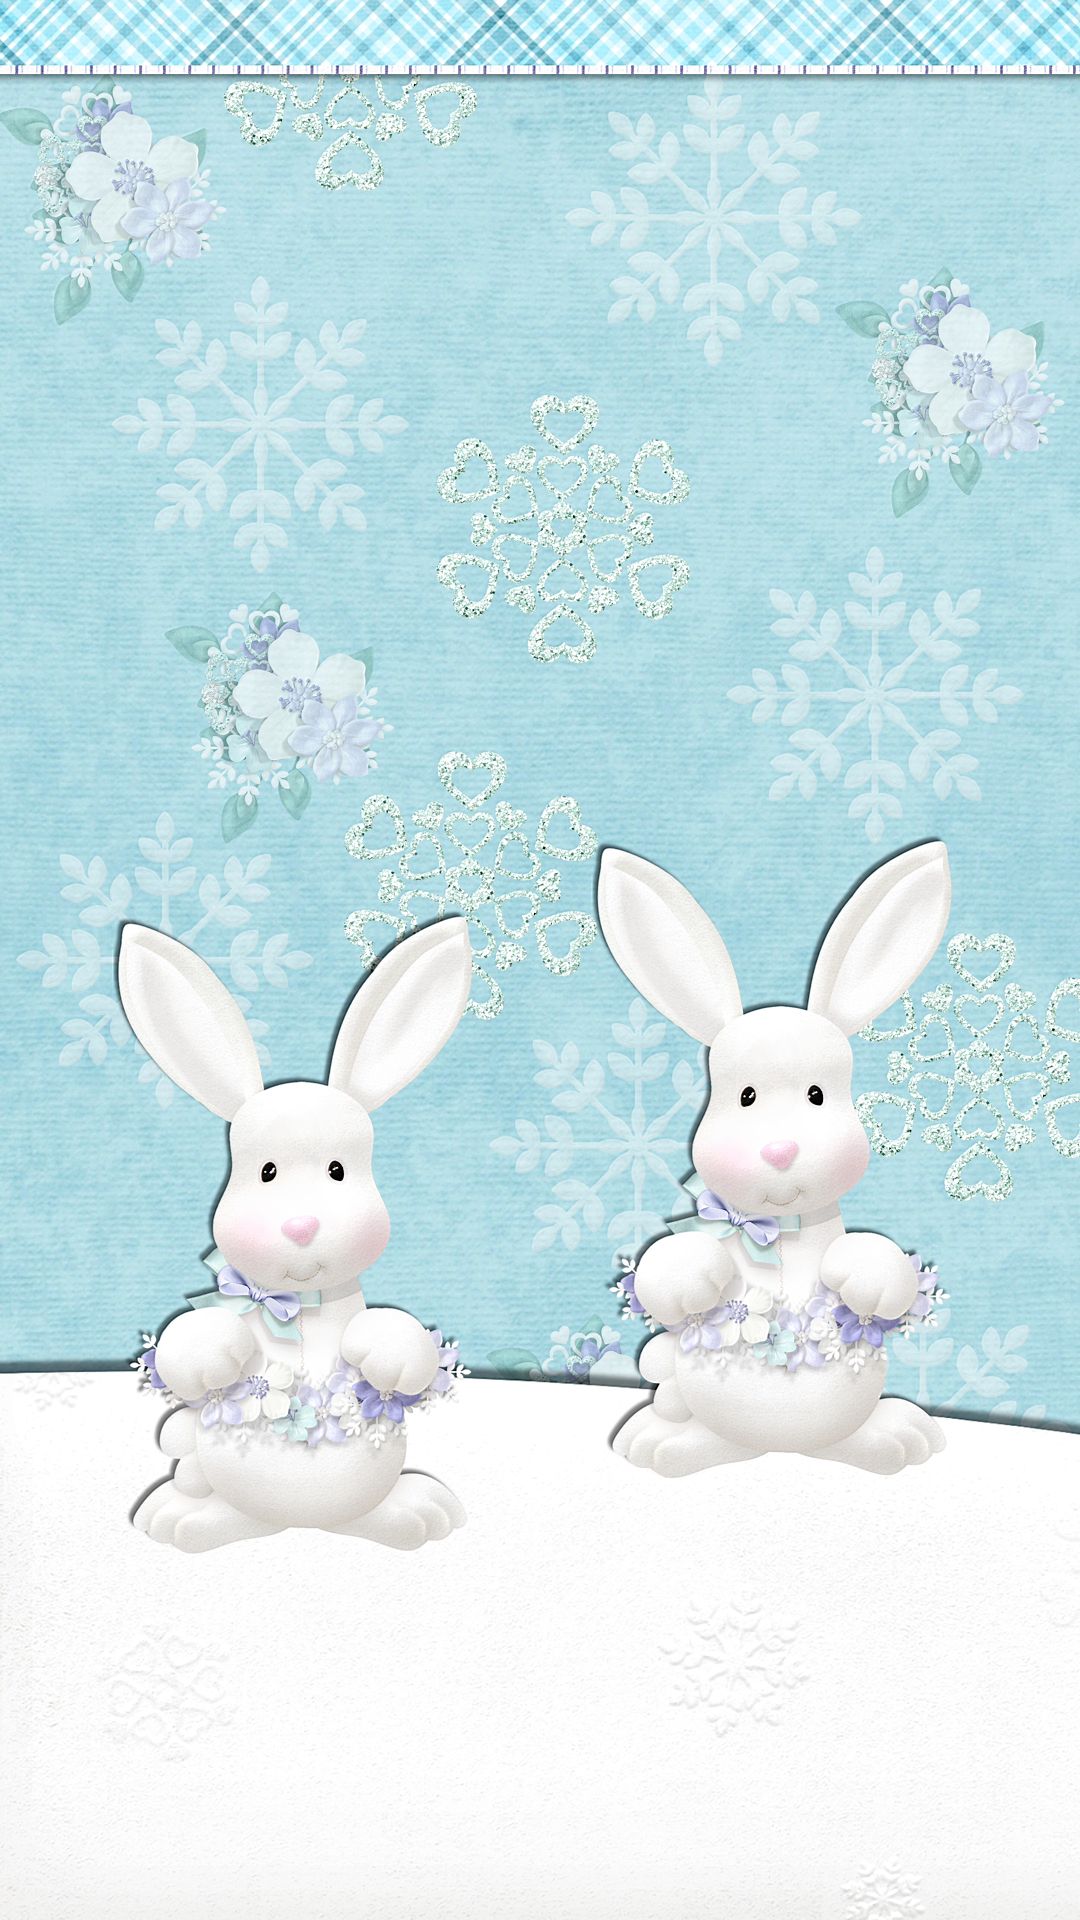 Snow Bunny (Wallpaper). ❣ ReeseyBelle ❣. Easter wallpaper, Bunny wallpaper, Winter background iphone